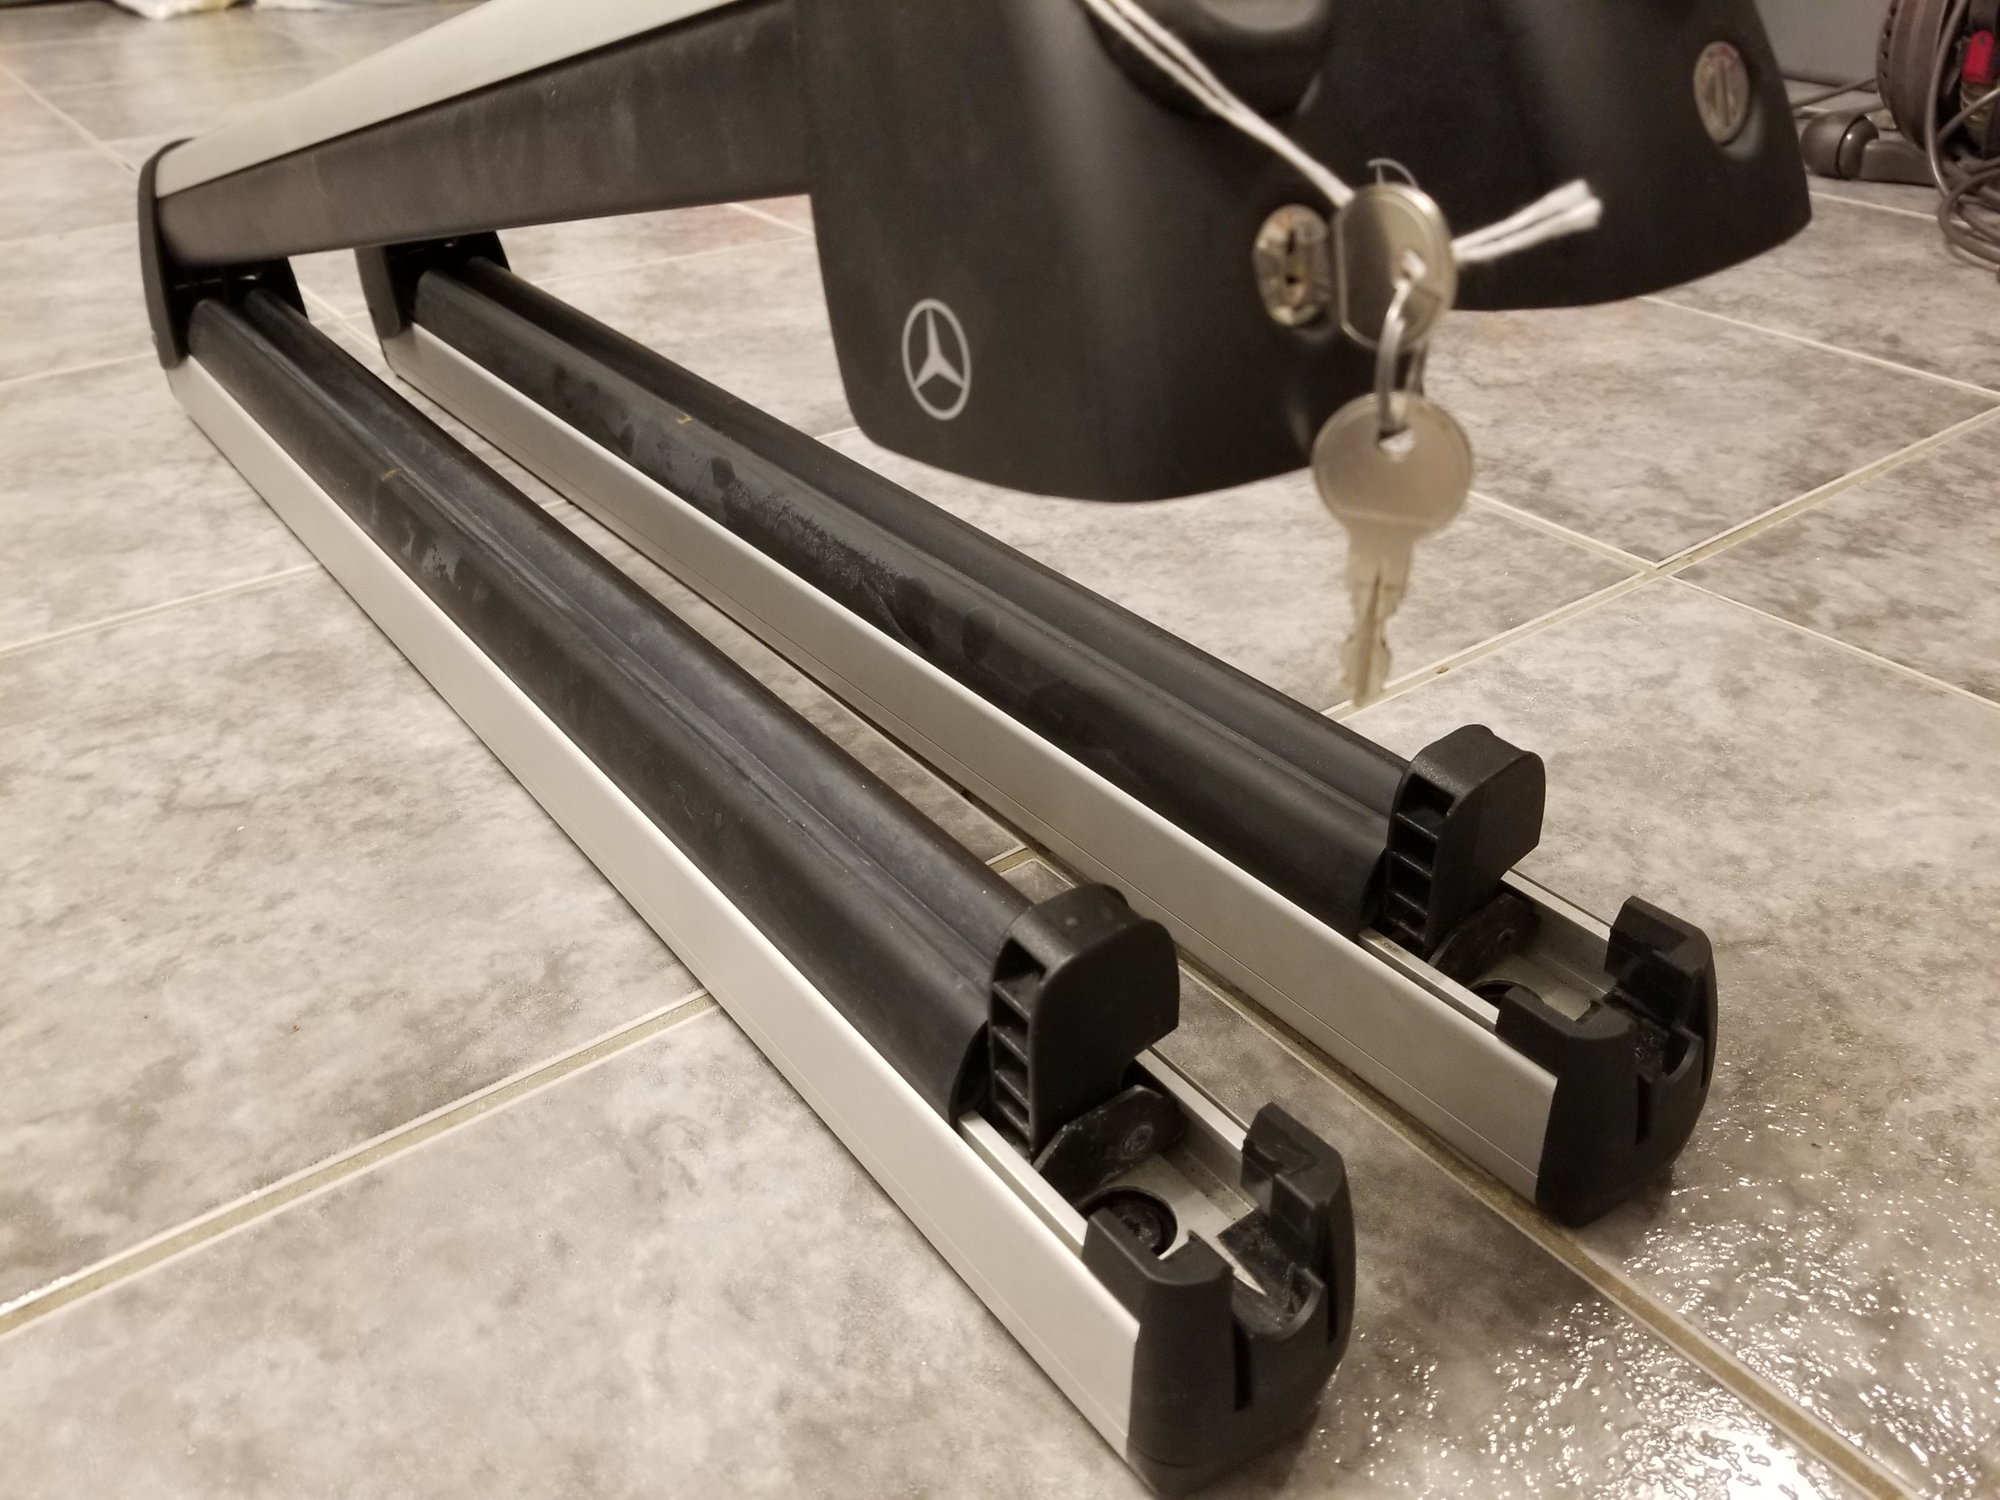 Accessories - Mercedes OEM ski/snowboard rack (Deluxe wider version) - Used - New York, NY 10011, United States